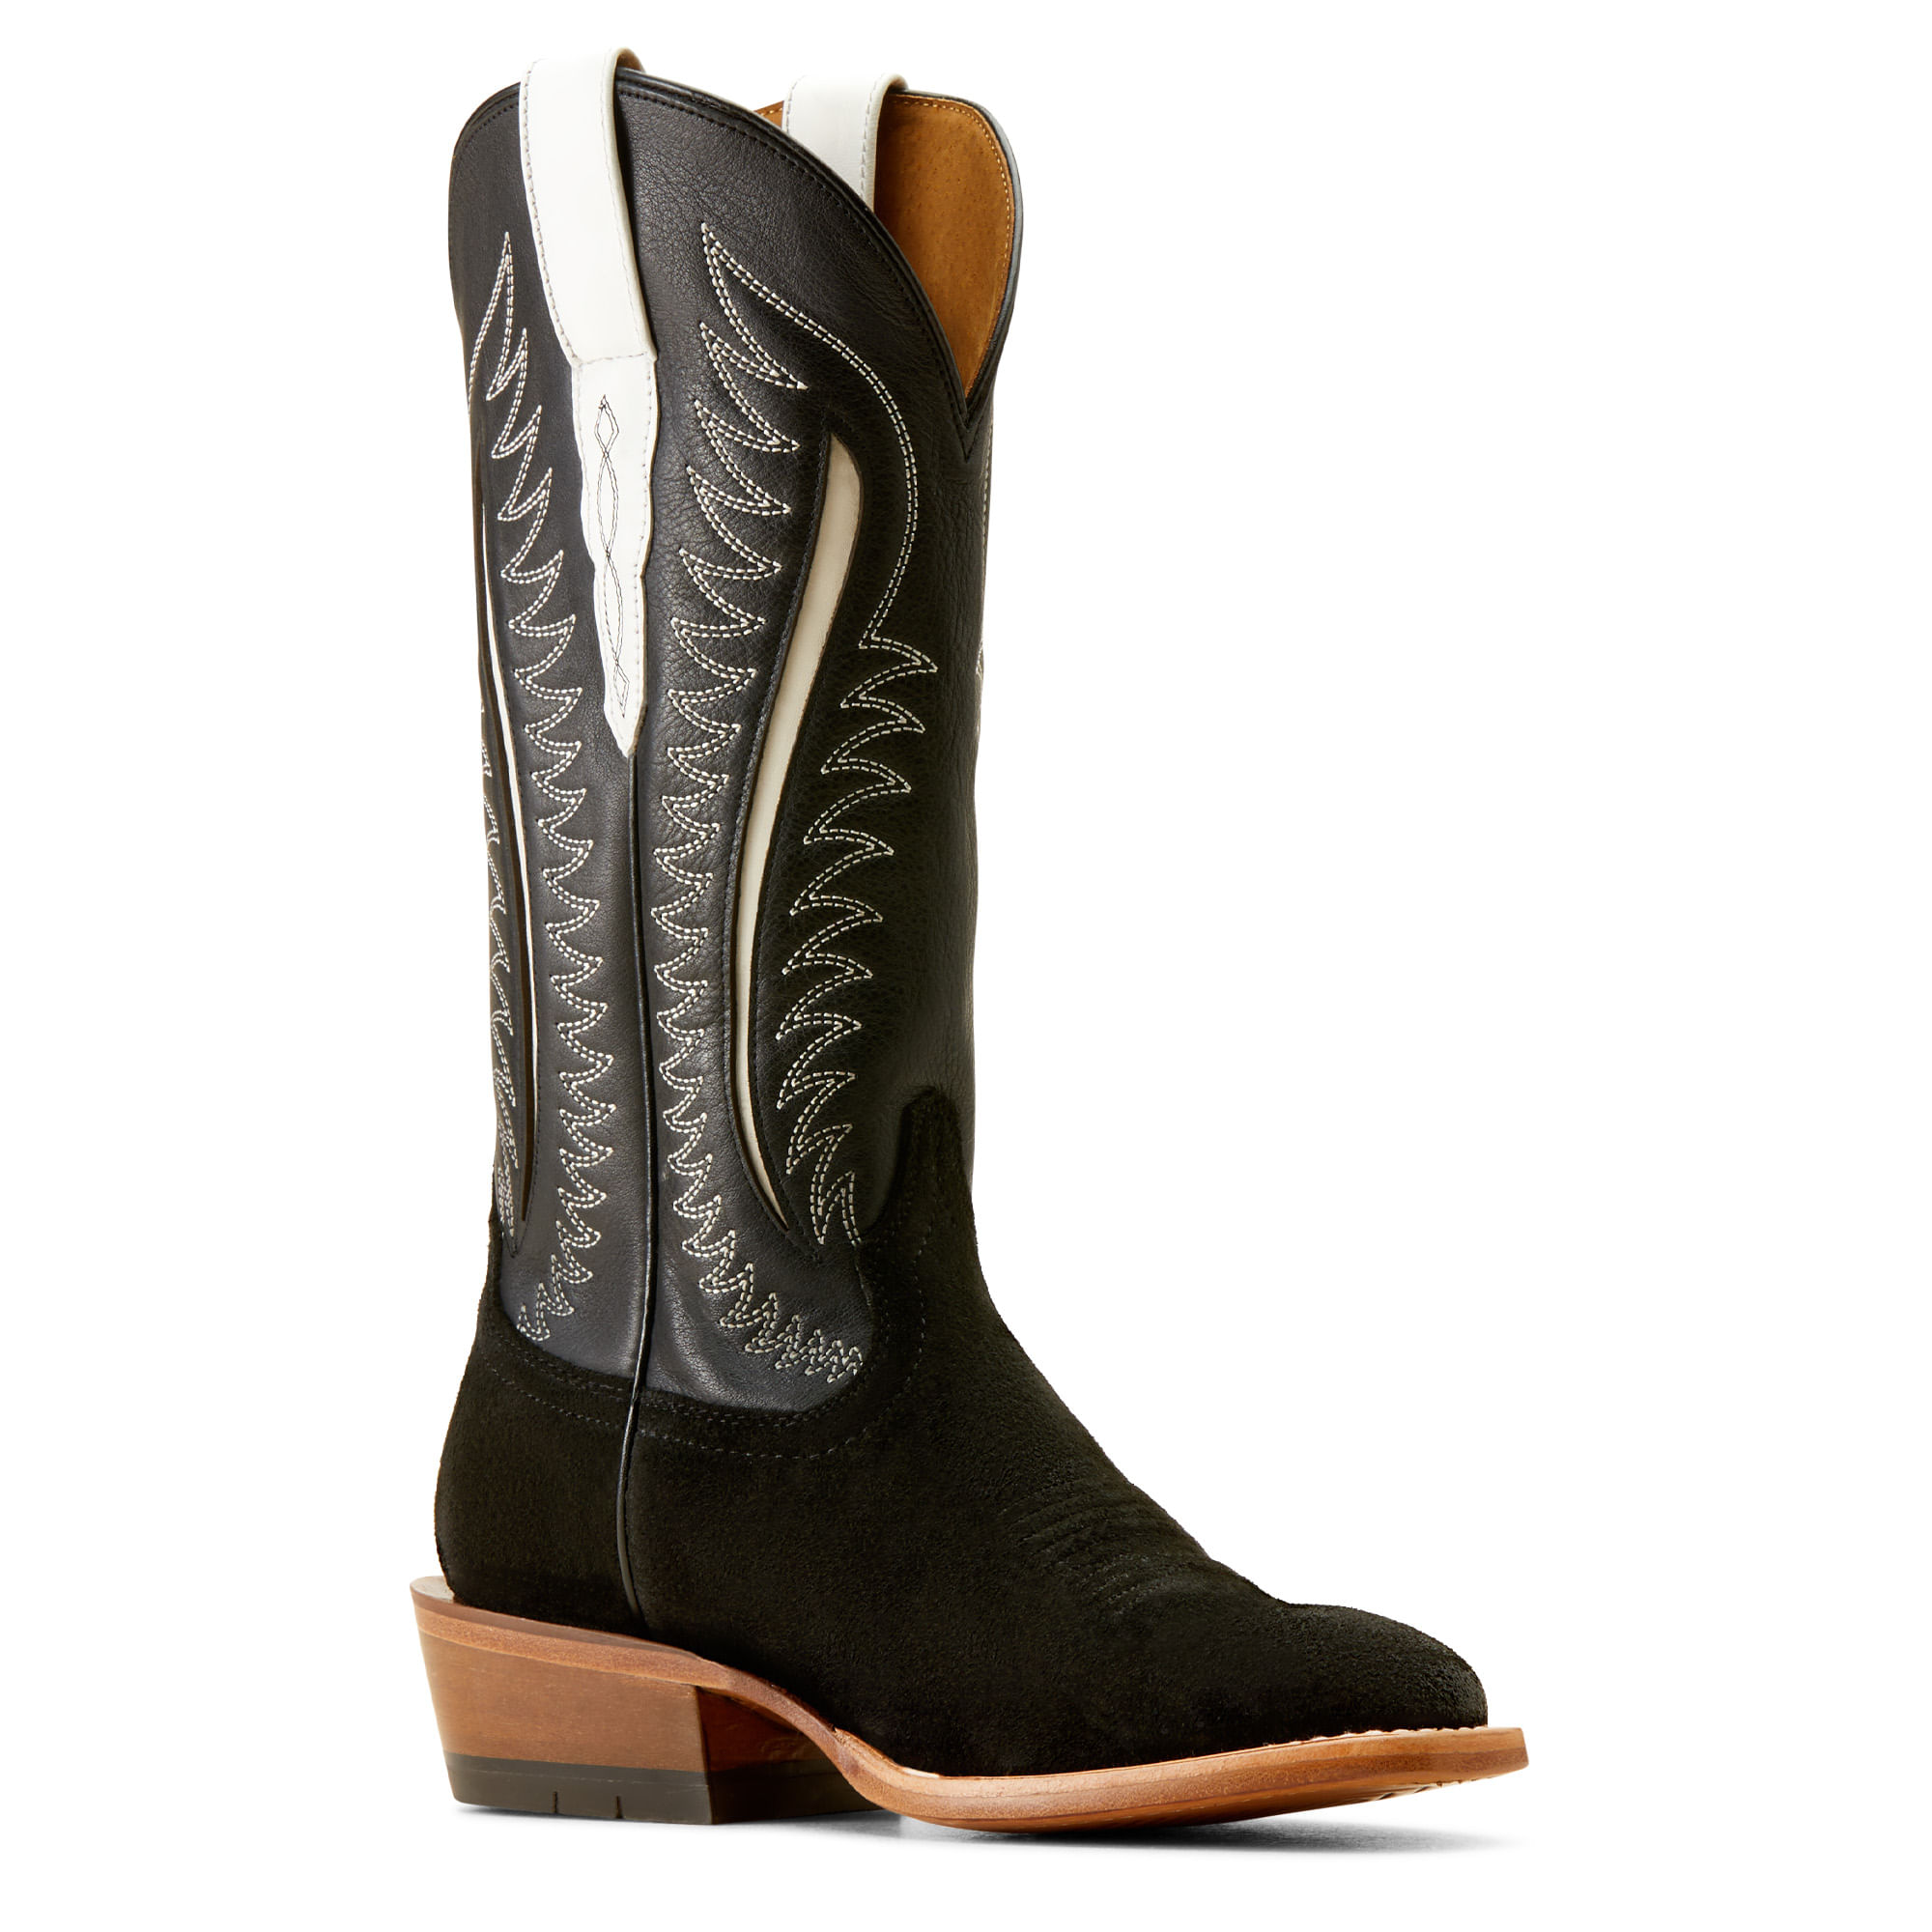 The Texas Boot Company - The Ariat Arena Rebound. $189.99 - Sign up for our  email list and Save 20% on your 1st online order.